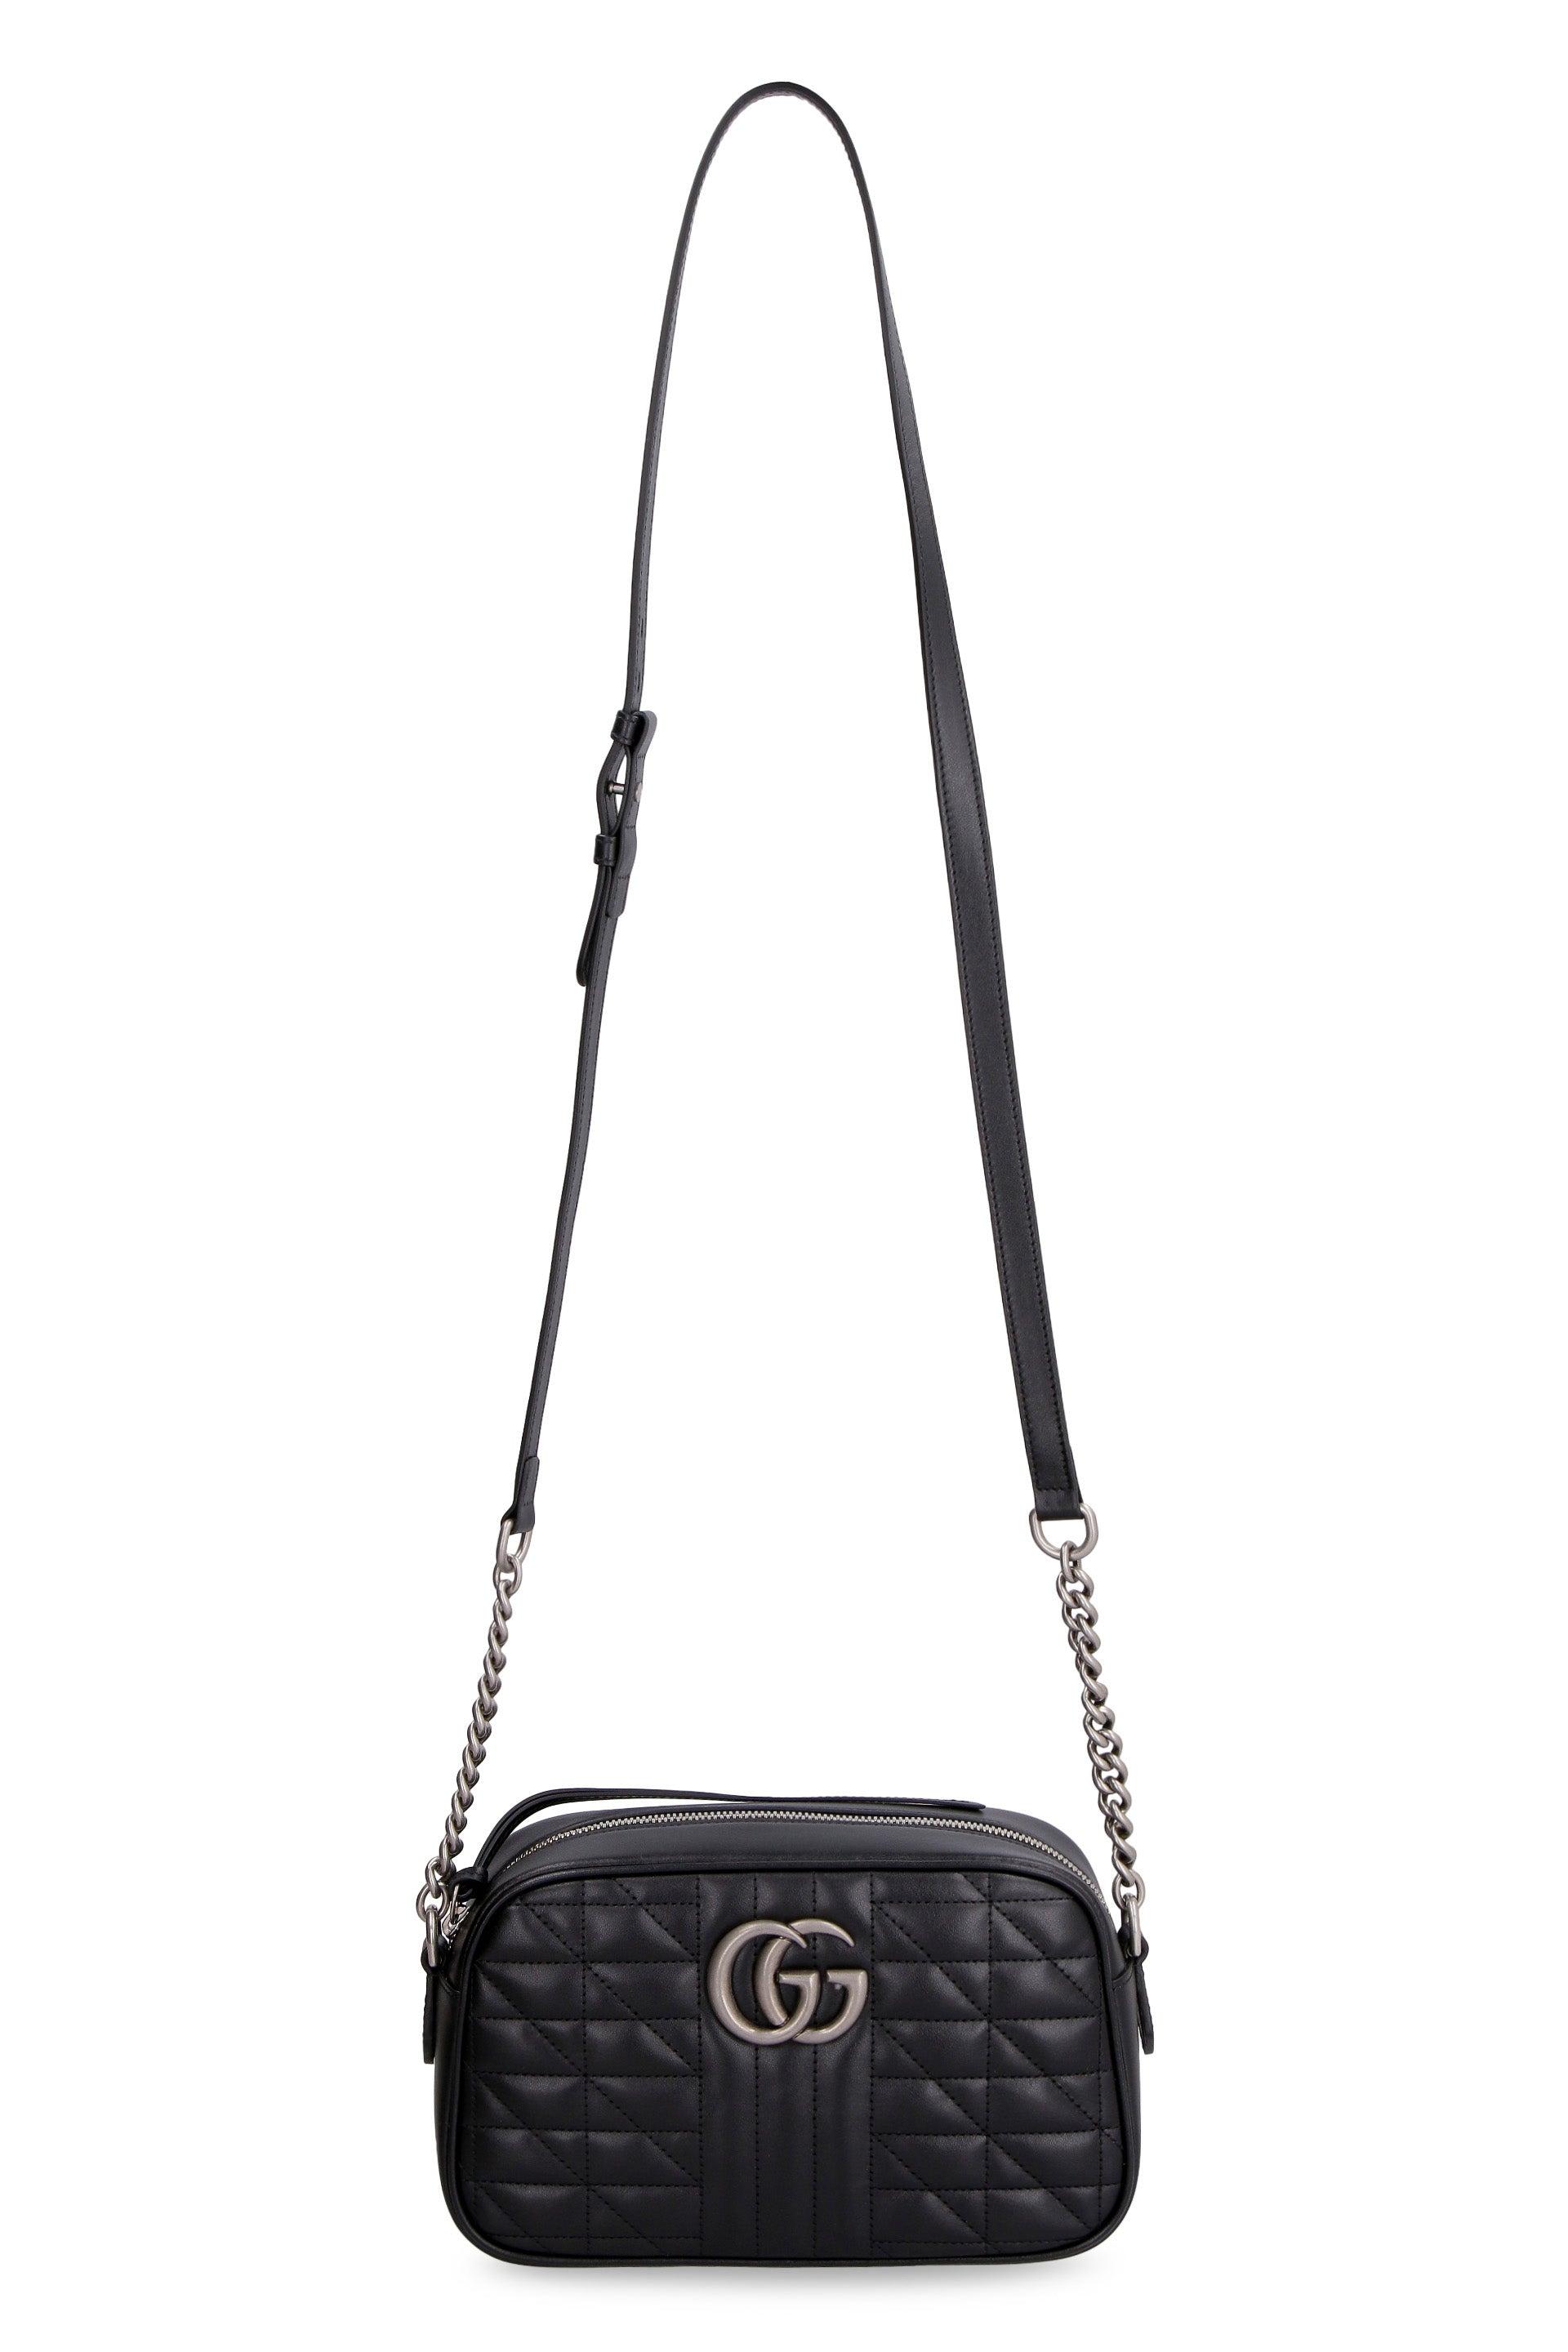 Gucci GG Marmont Quilted Leather Shoulder Bag in Black | Lyst